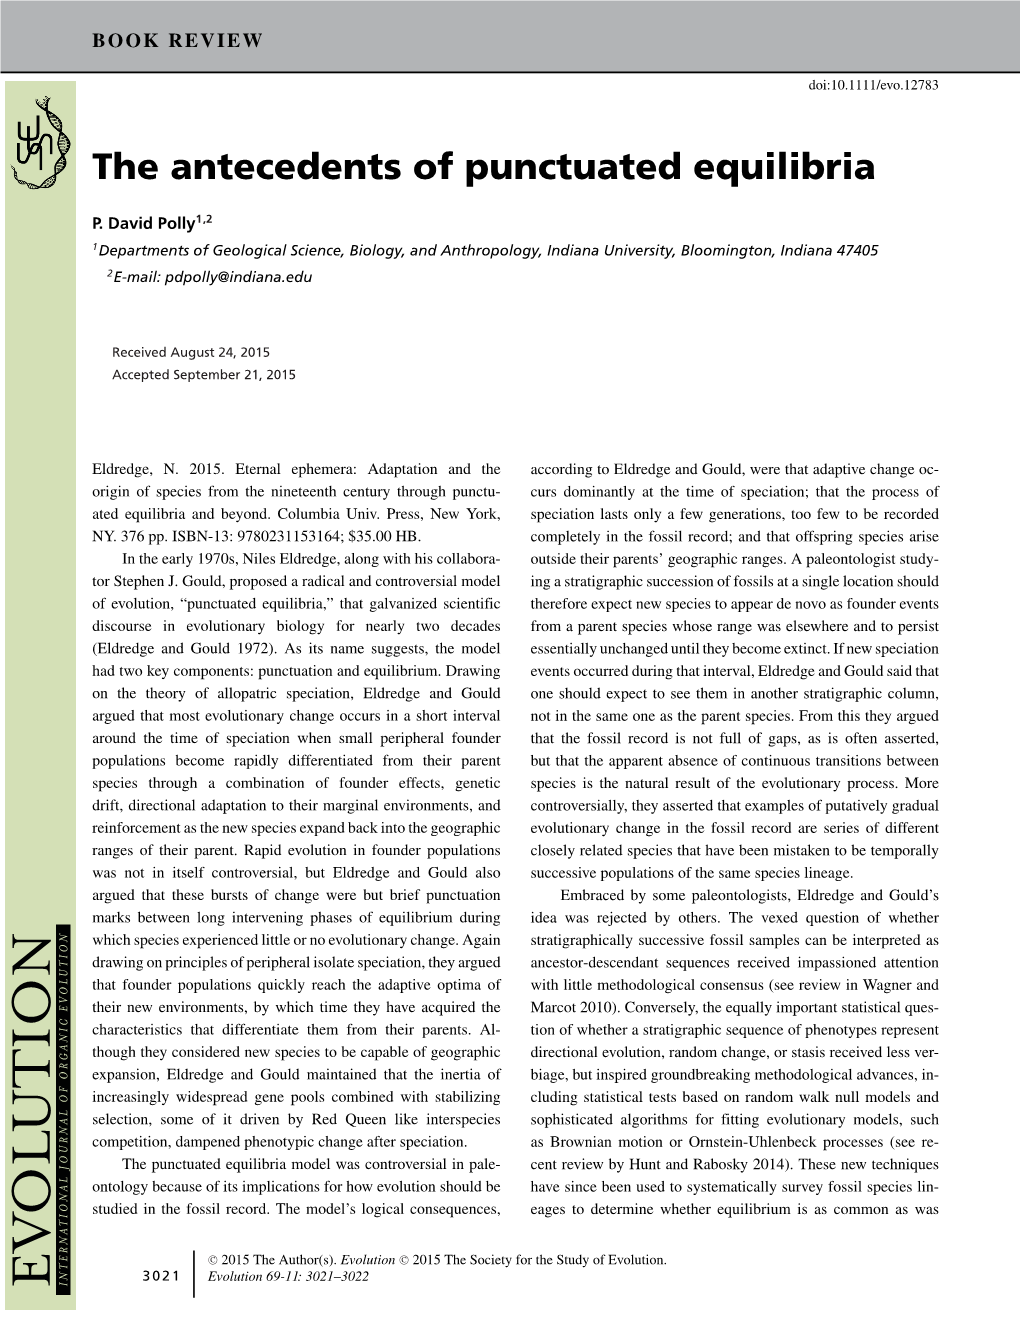 The Antecedents of Punctuated Equilibria